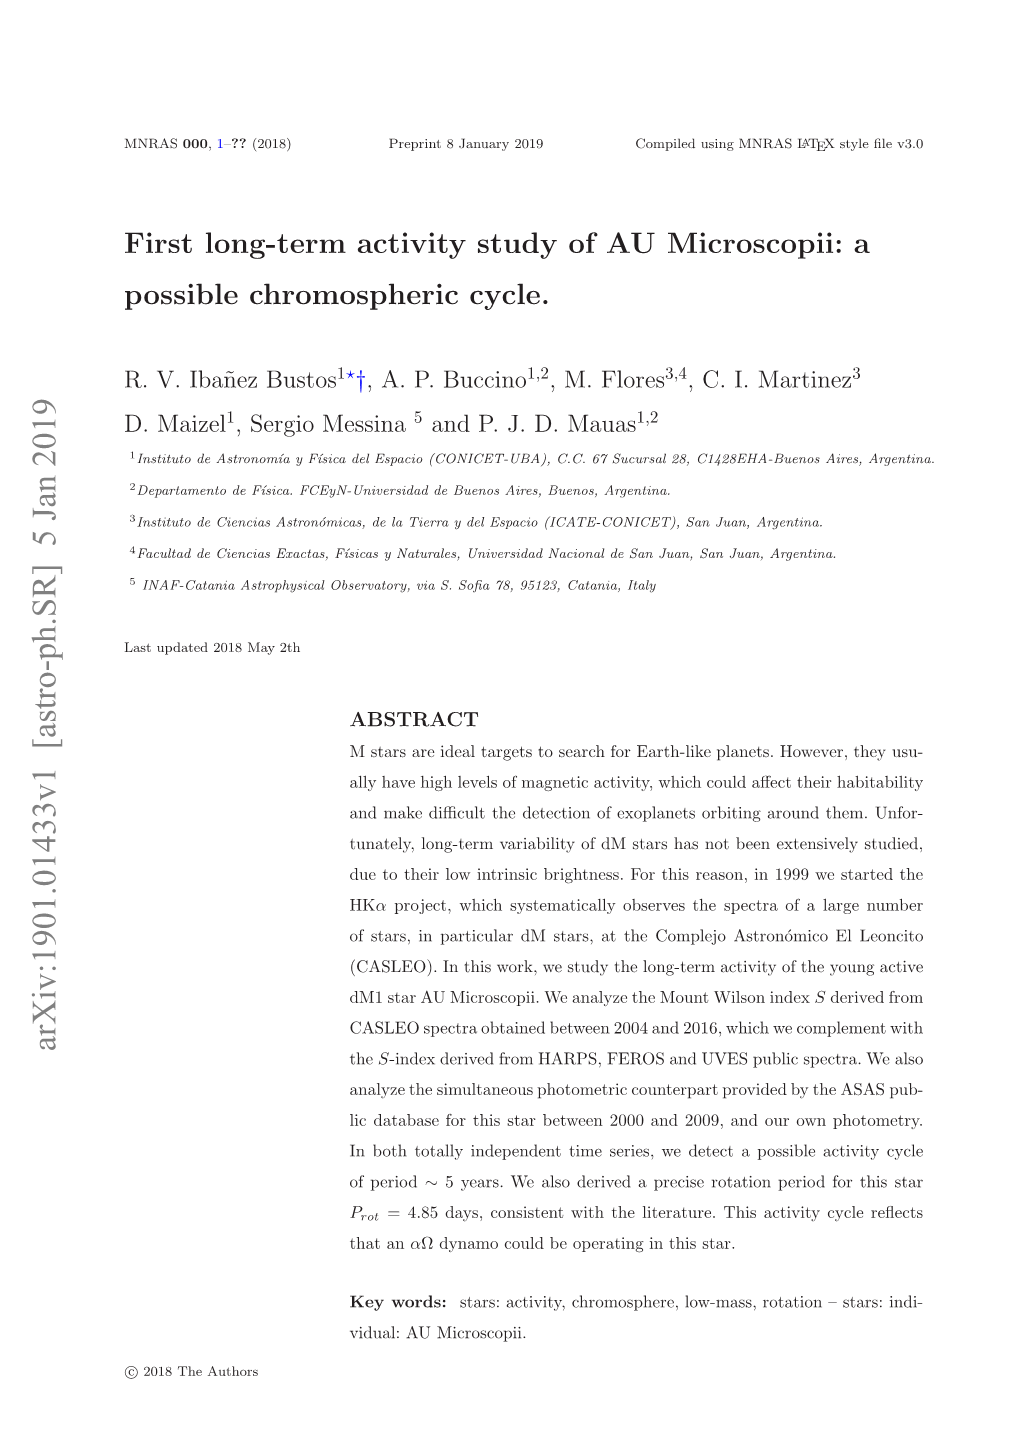 First Long-Term Activity Study of AU Microscopii: a Possible